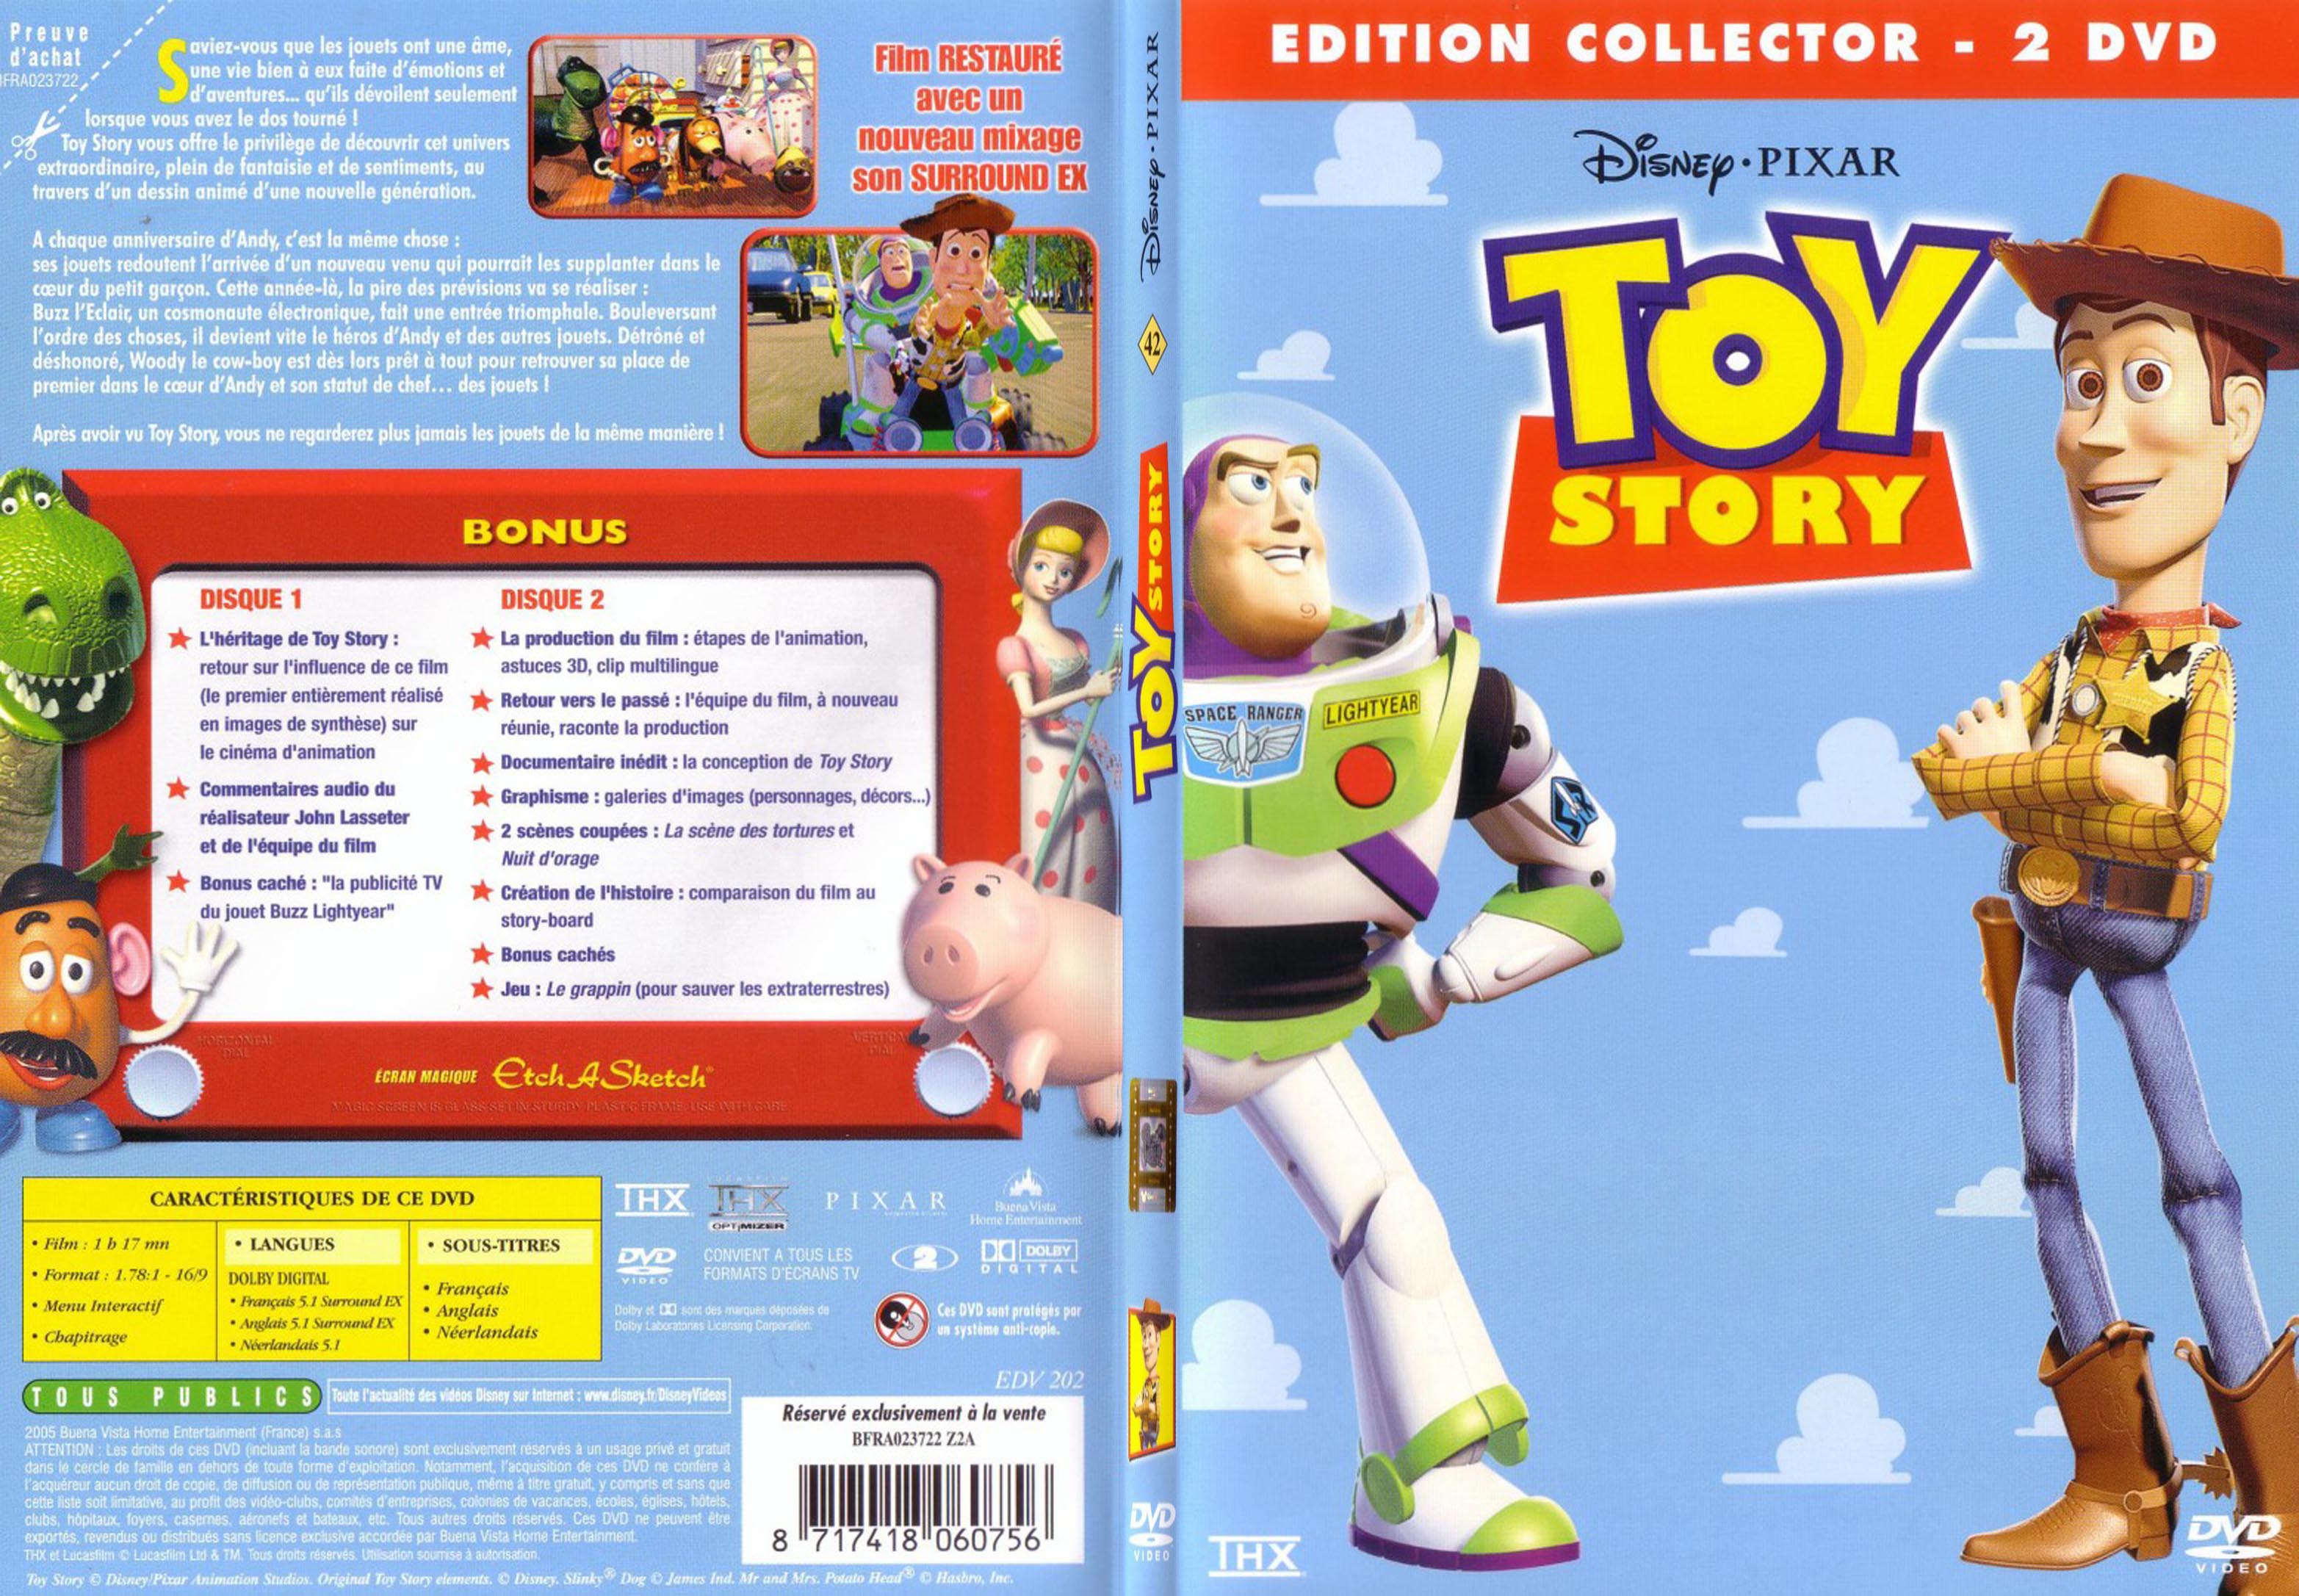 Jaquette DVD Toy story - SLIM